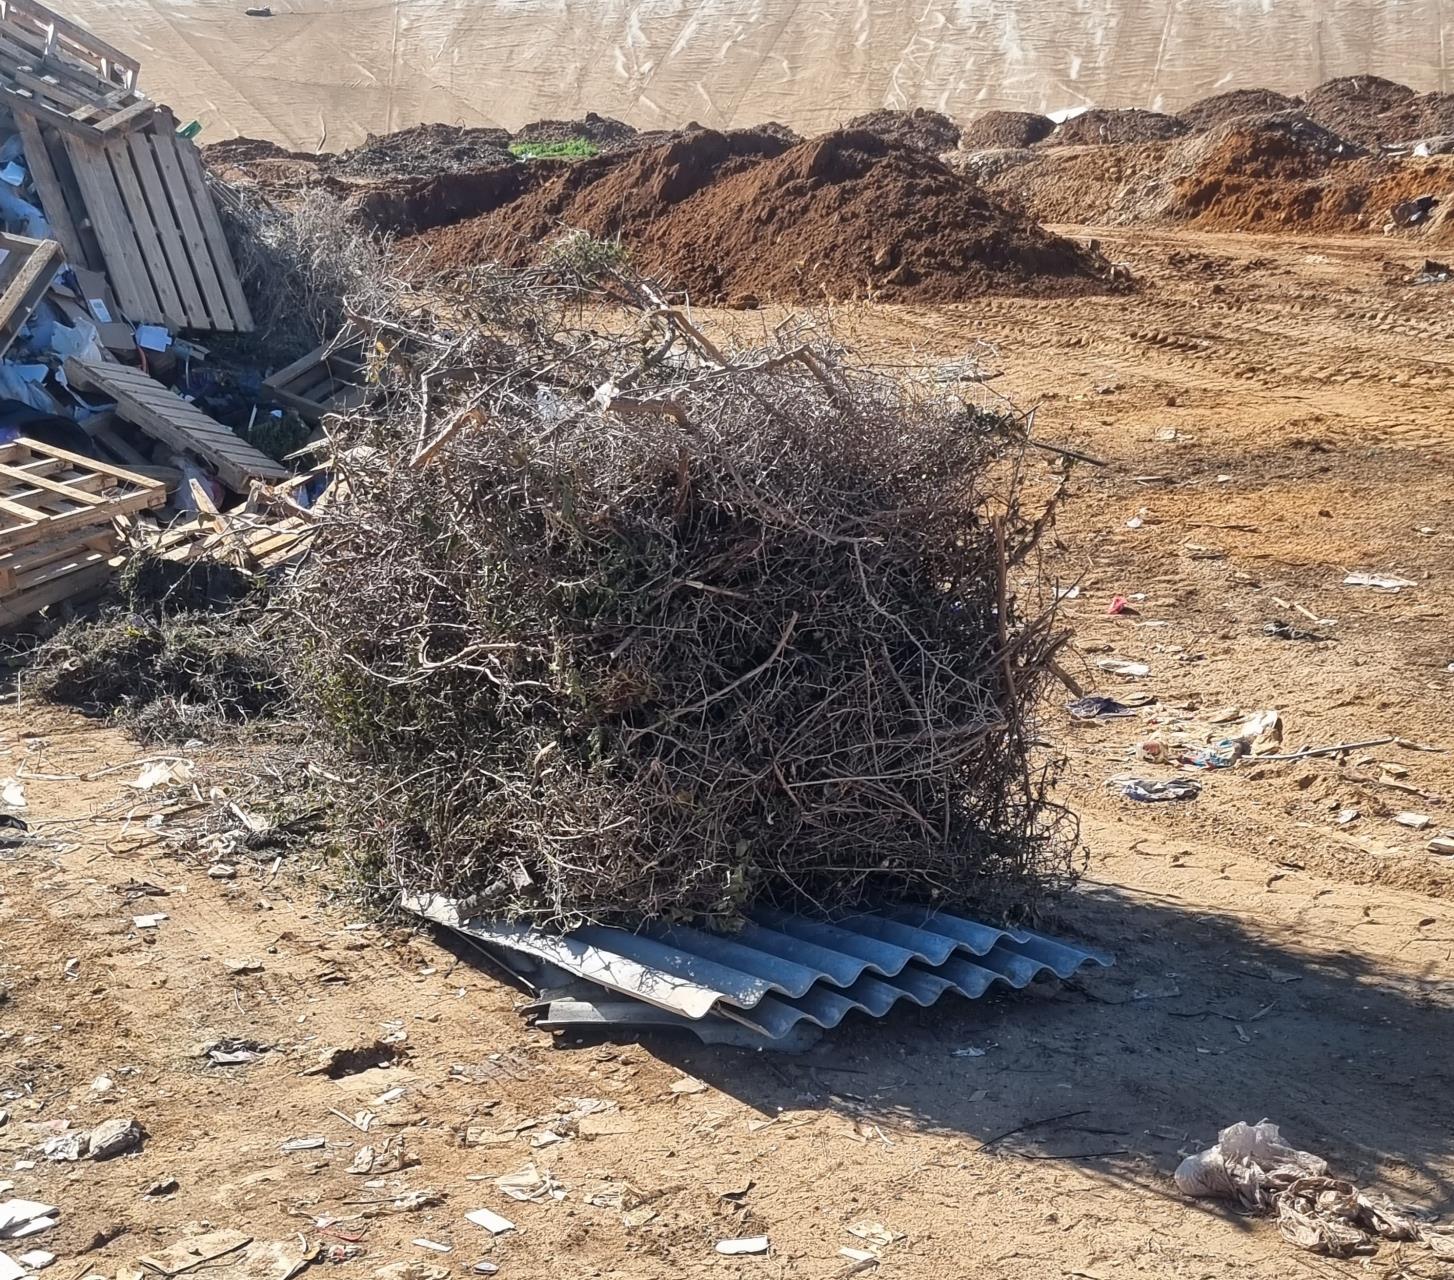 Community warned to stop illegal asbestos dumping